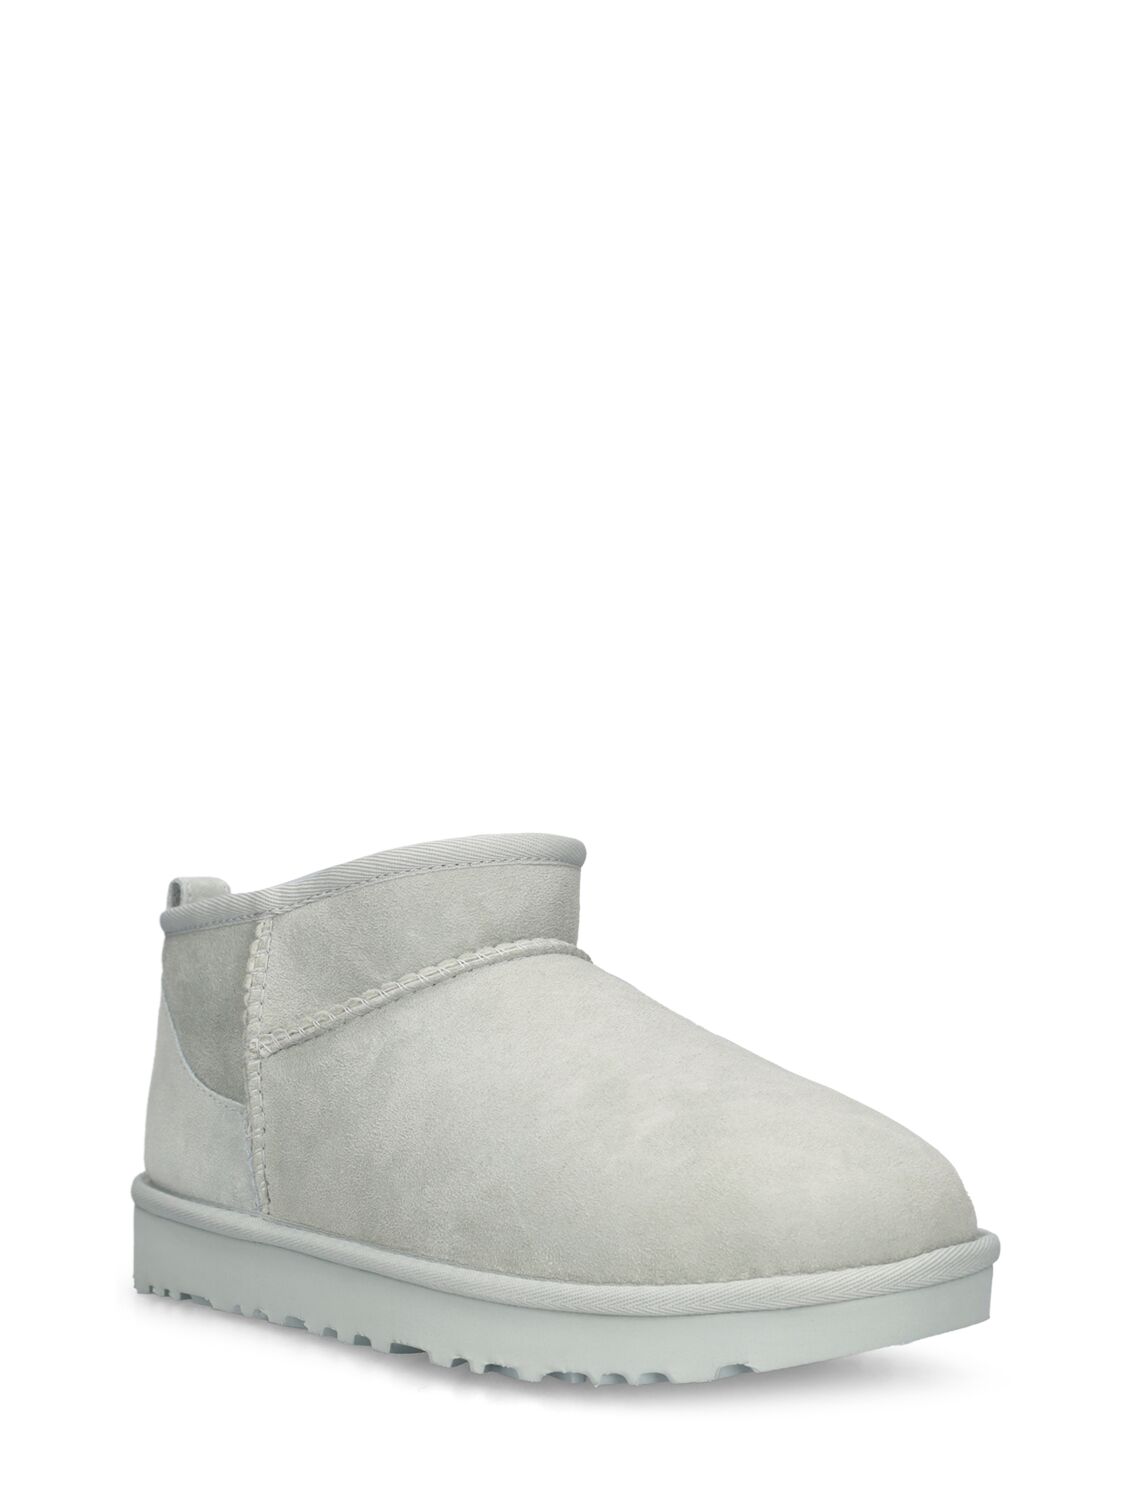 Shop Ugg 10mm Classic Ultra Mini Shearling Boots In Off White